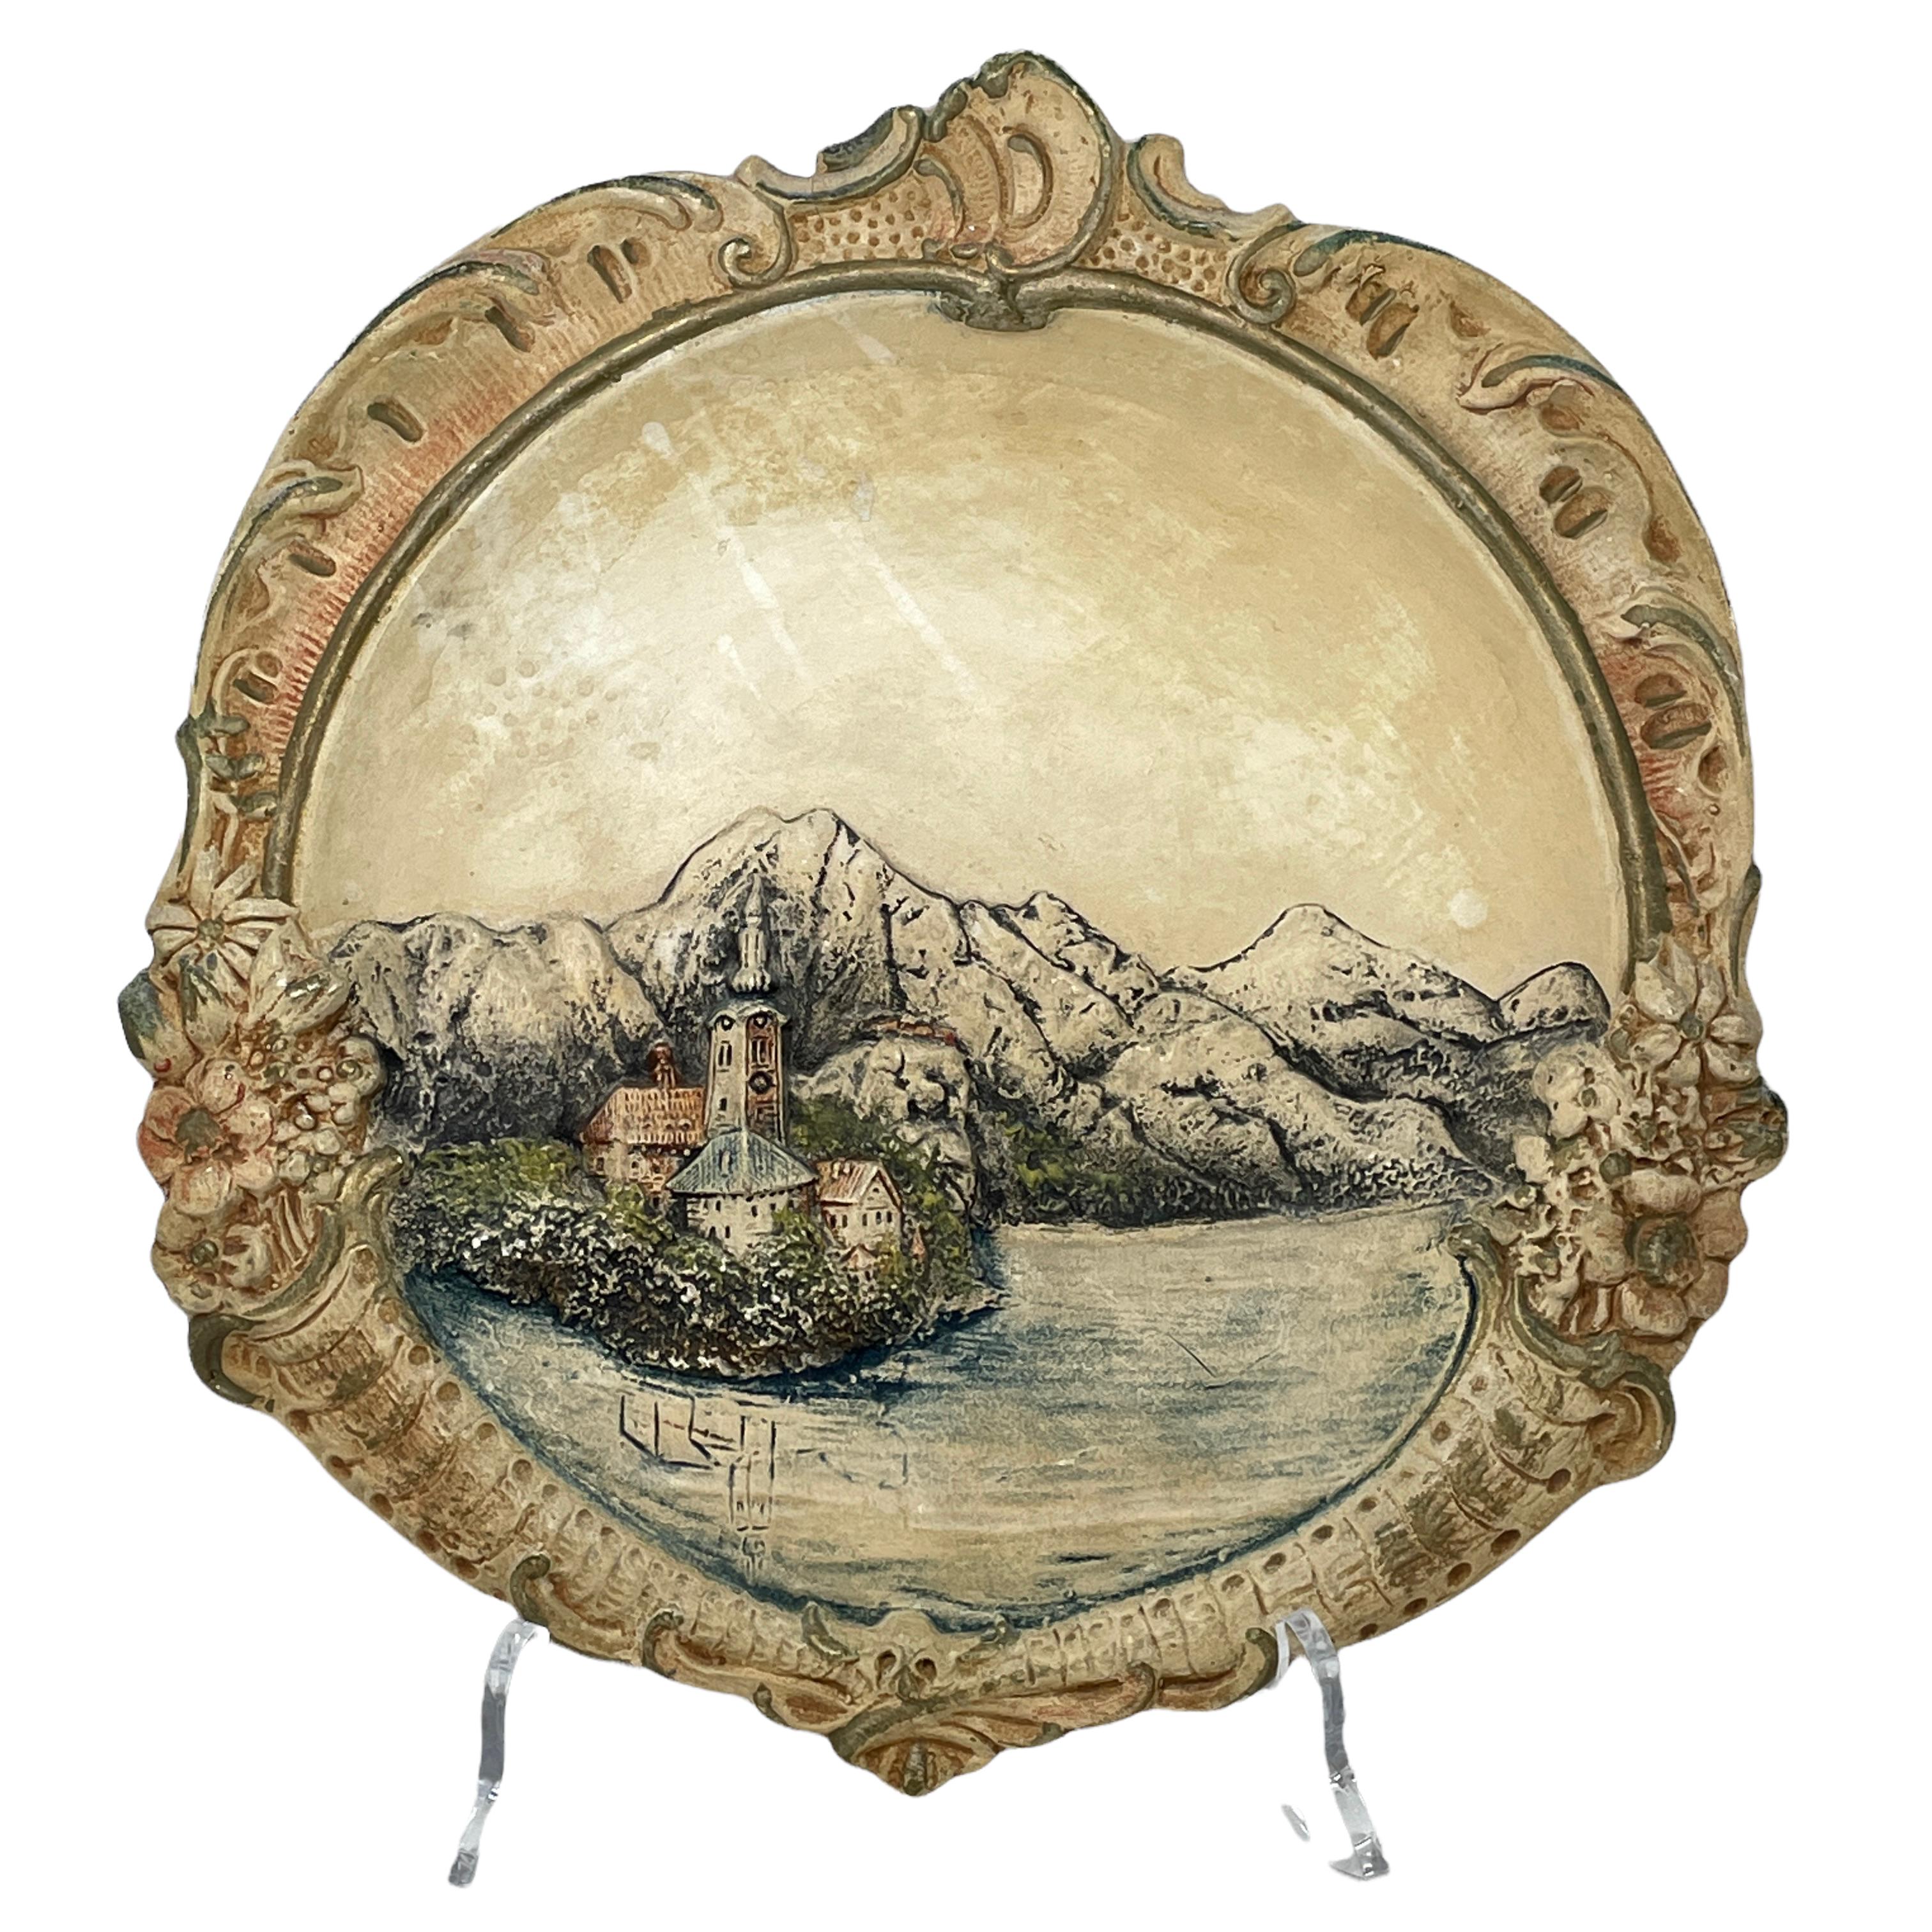 This beautiful wall decoration plate is a nice addition to your Wall. It is marked at the back. A nice addition to your toleware room or Hollywood regency interior.